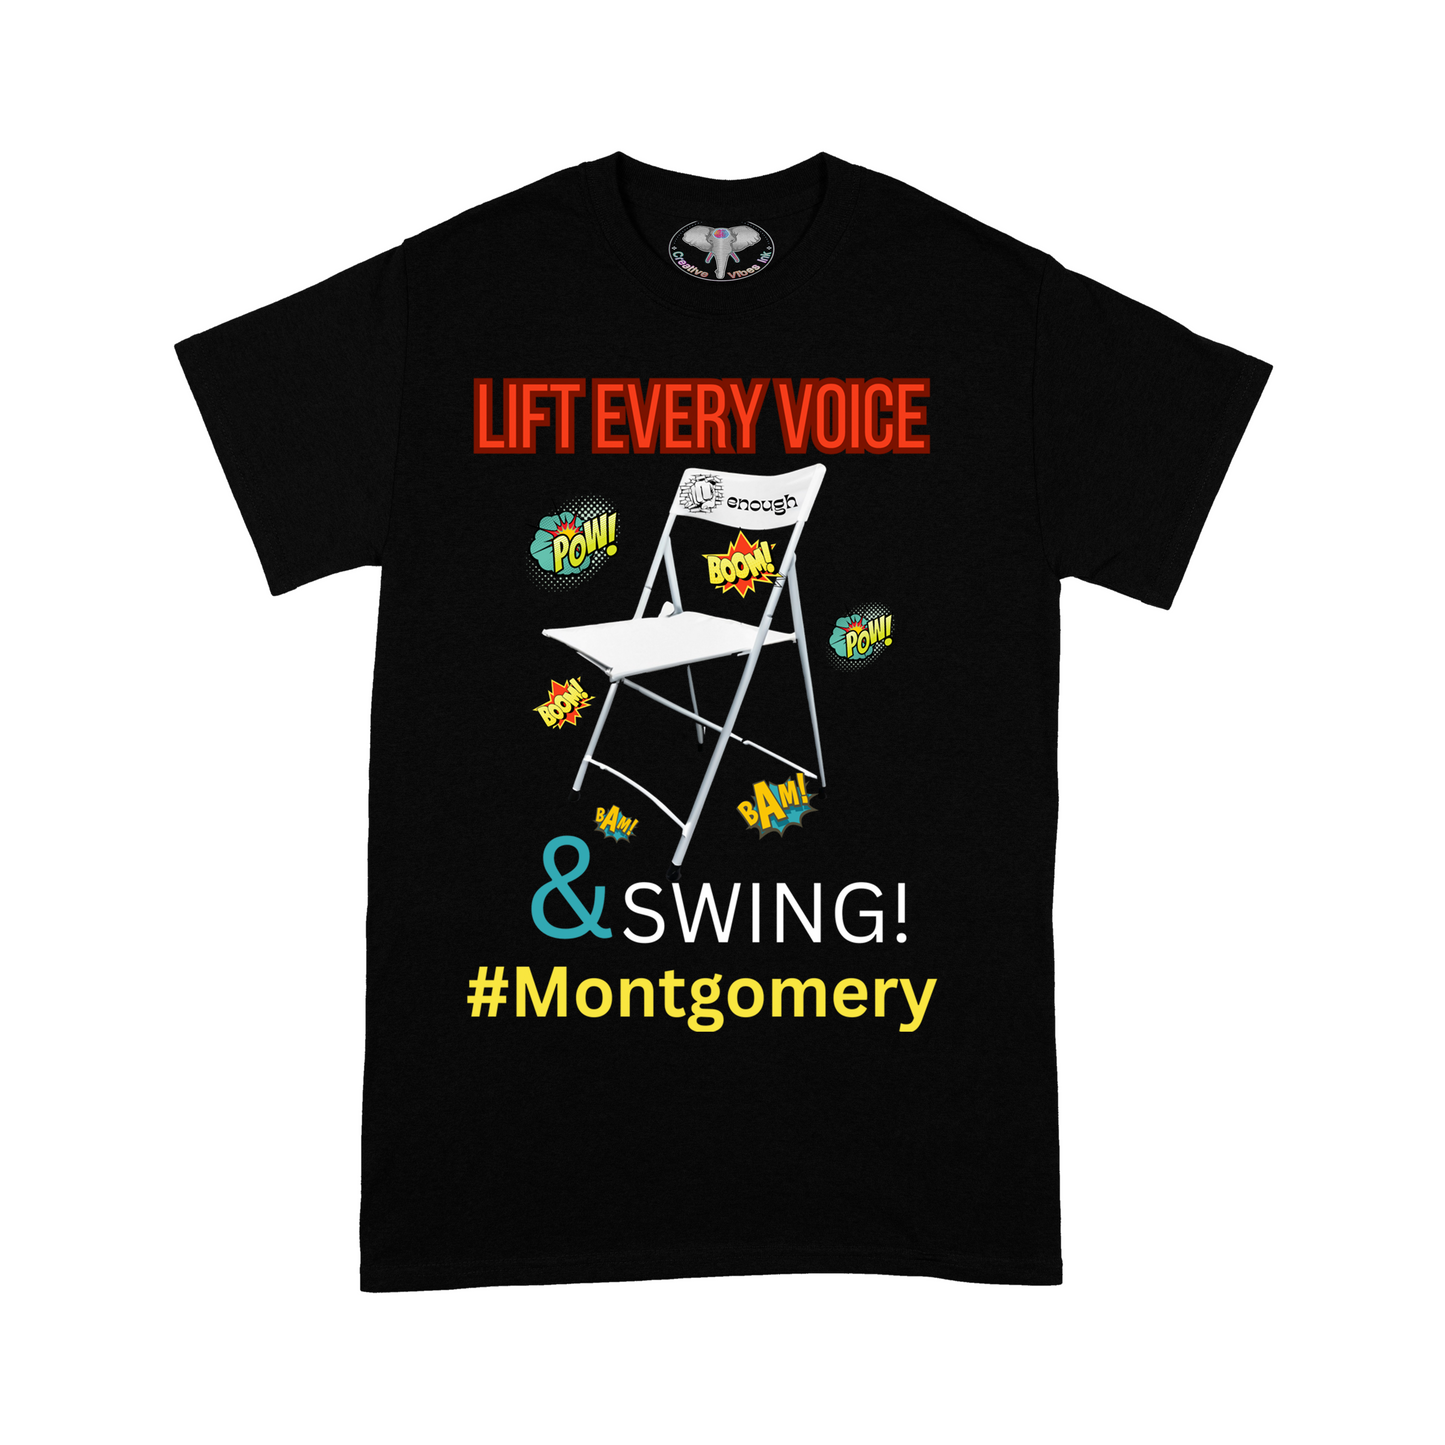 Lift Every Voice Graphic T-shirt